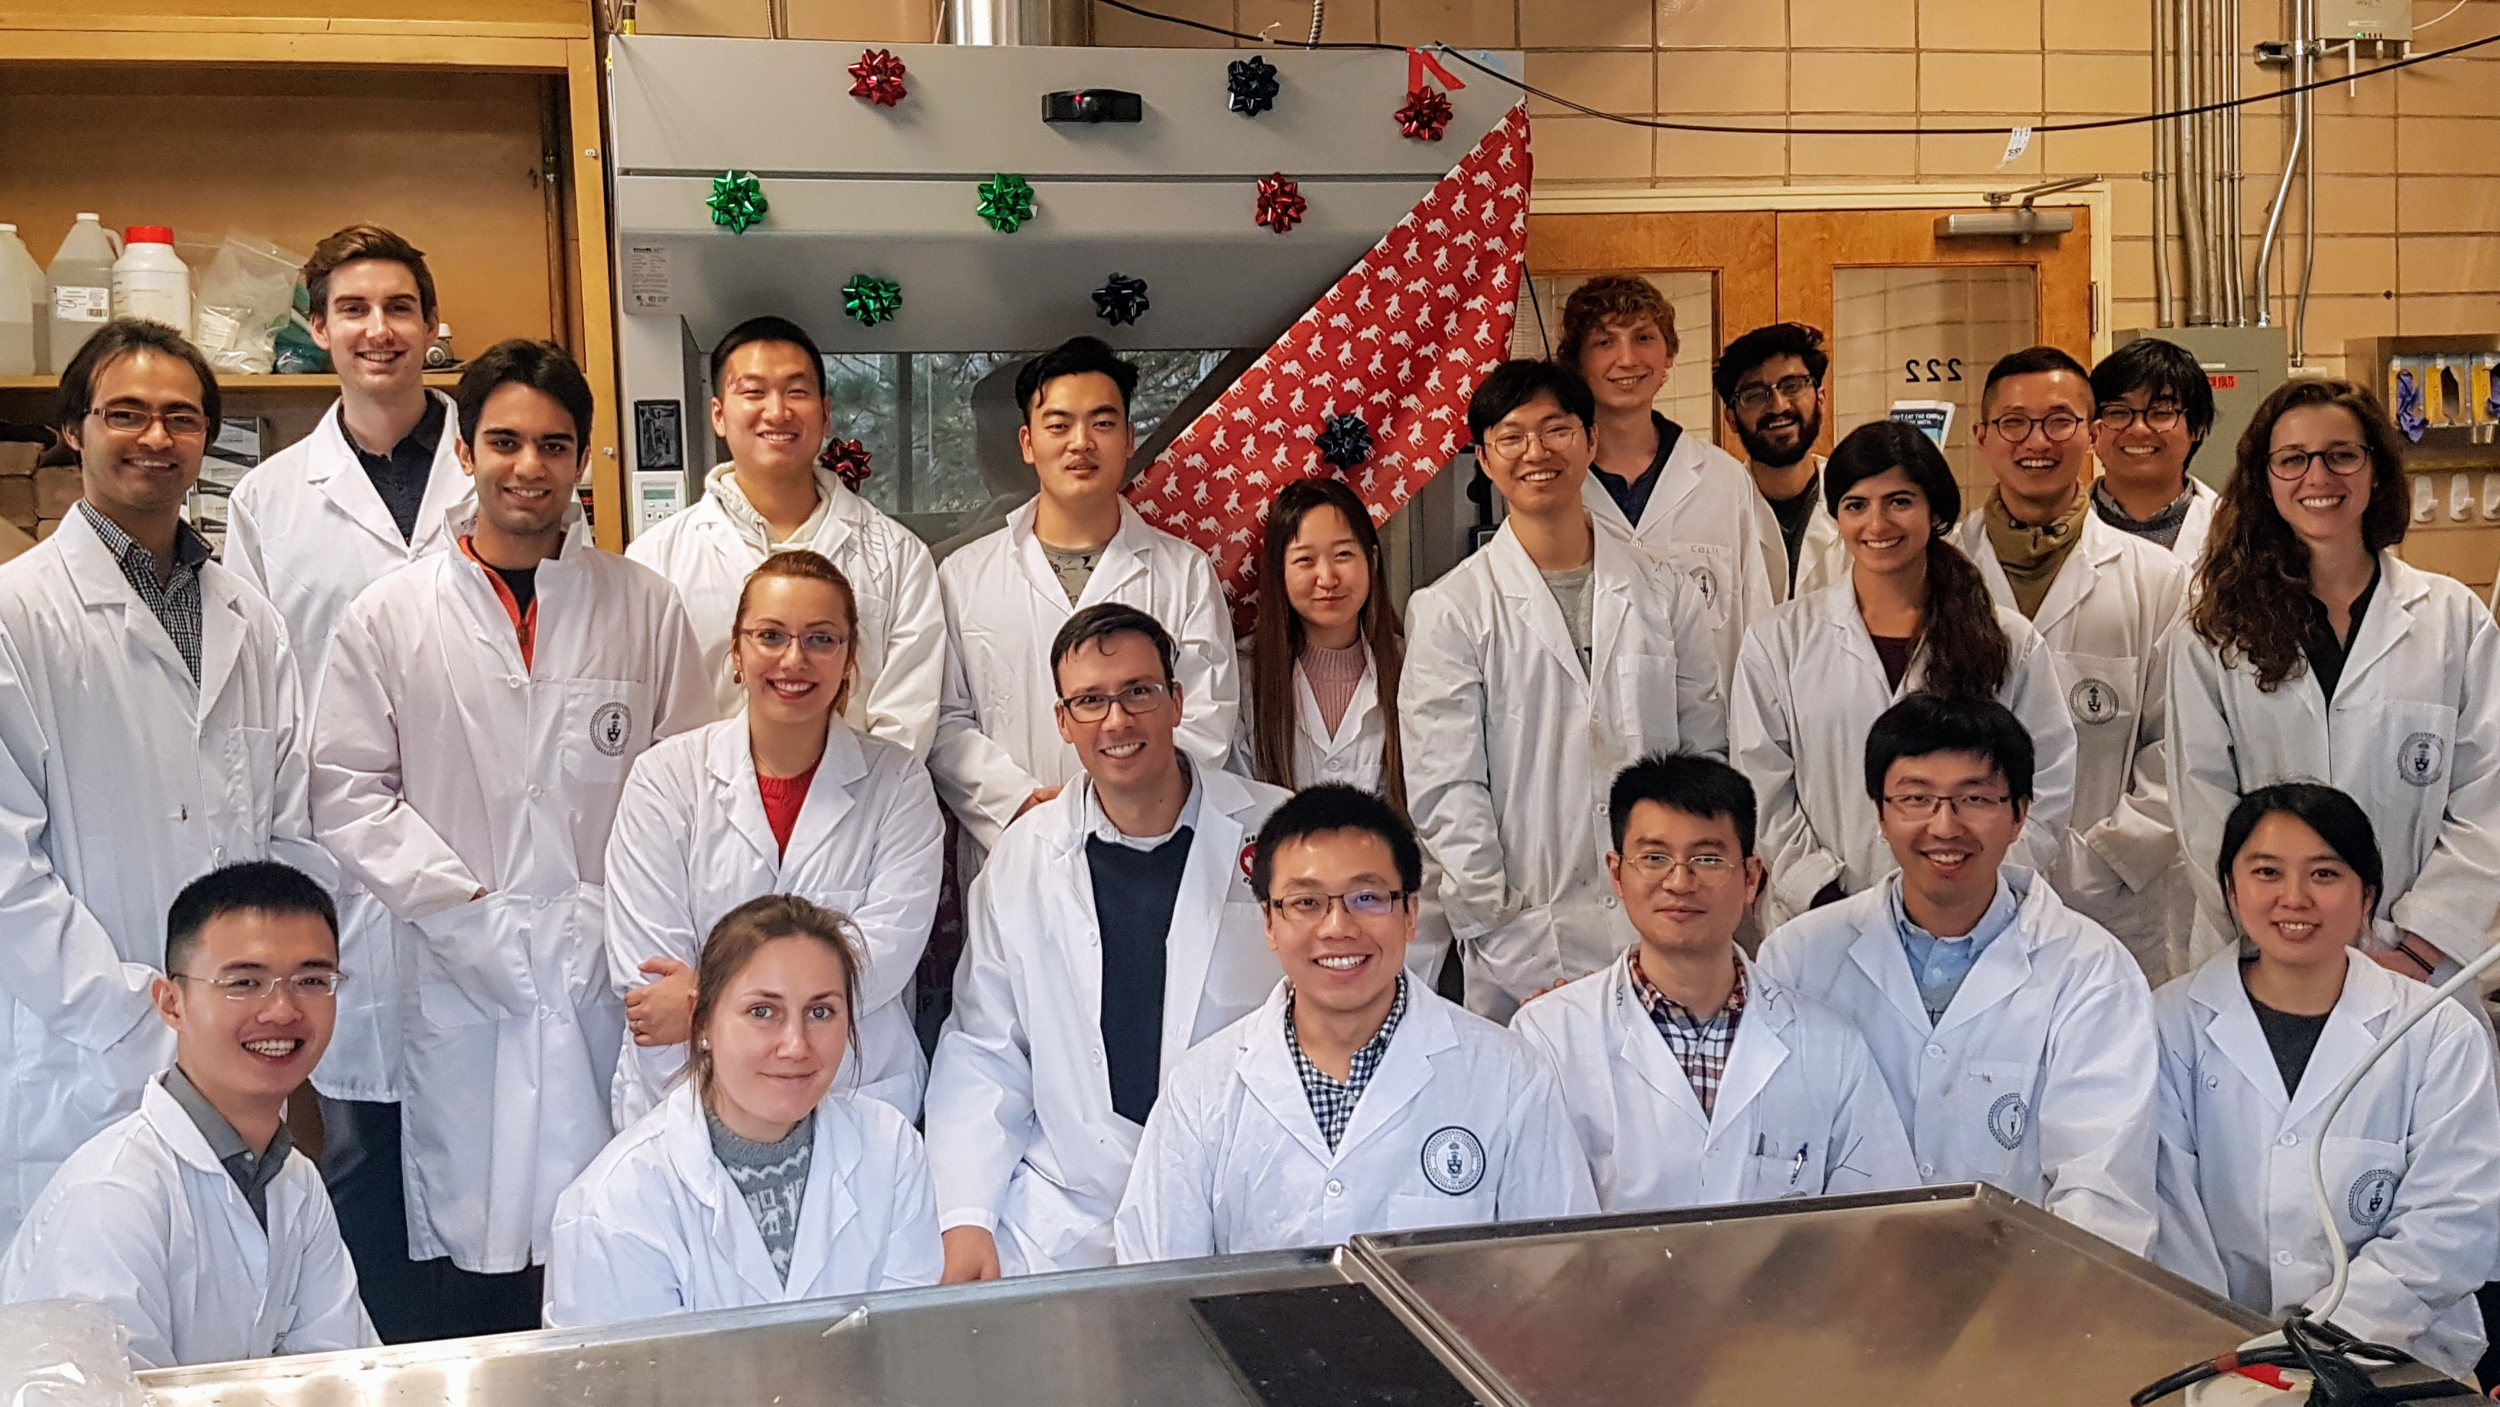   The Sinton Lab is very grateful to MIE and the Government of Canada Strategic Investment Fund for investing in our labs in 2017.&nbsp; Thank you for your support!  